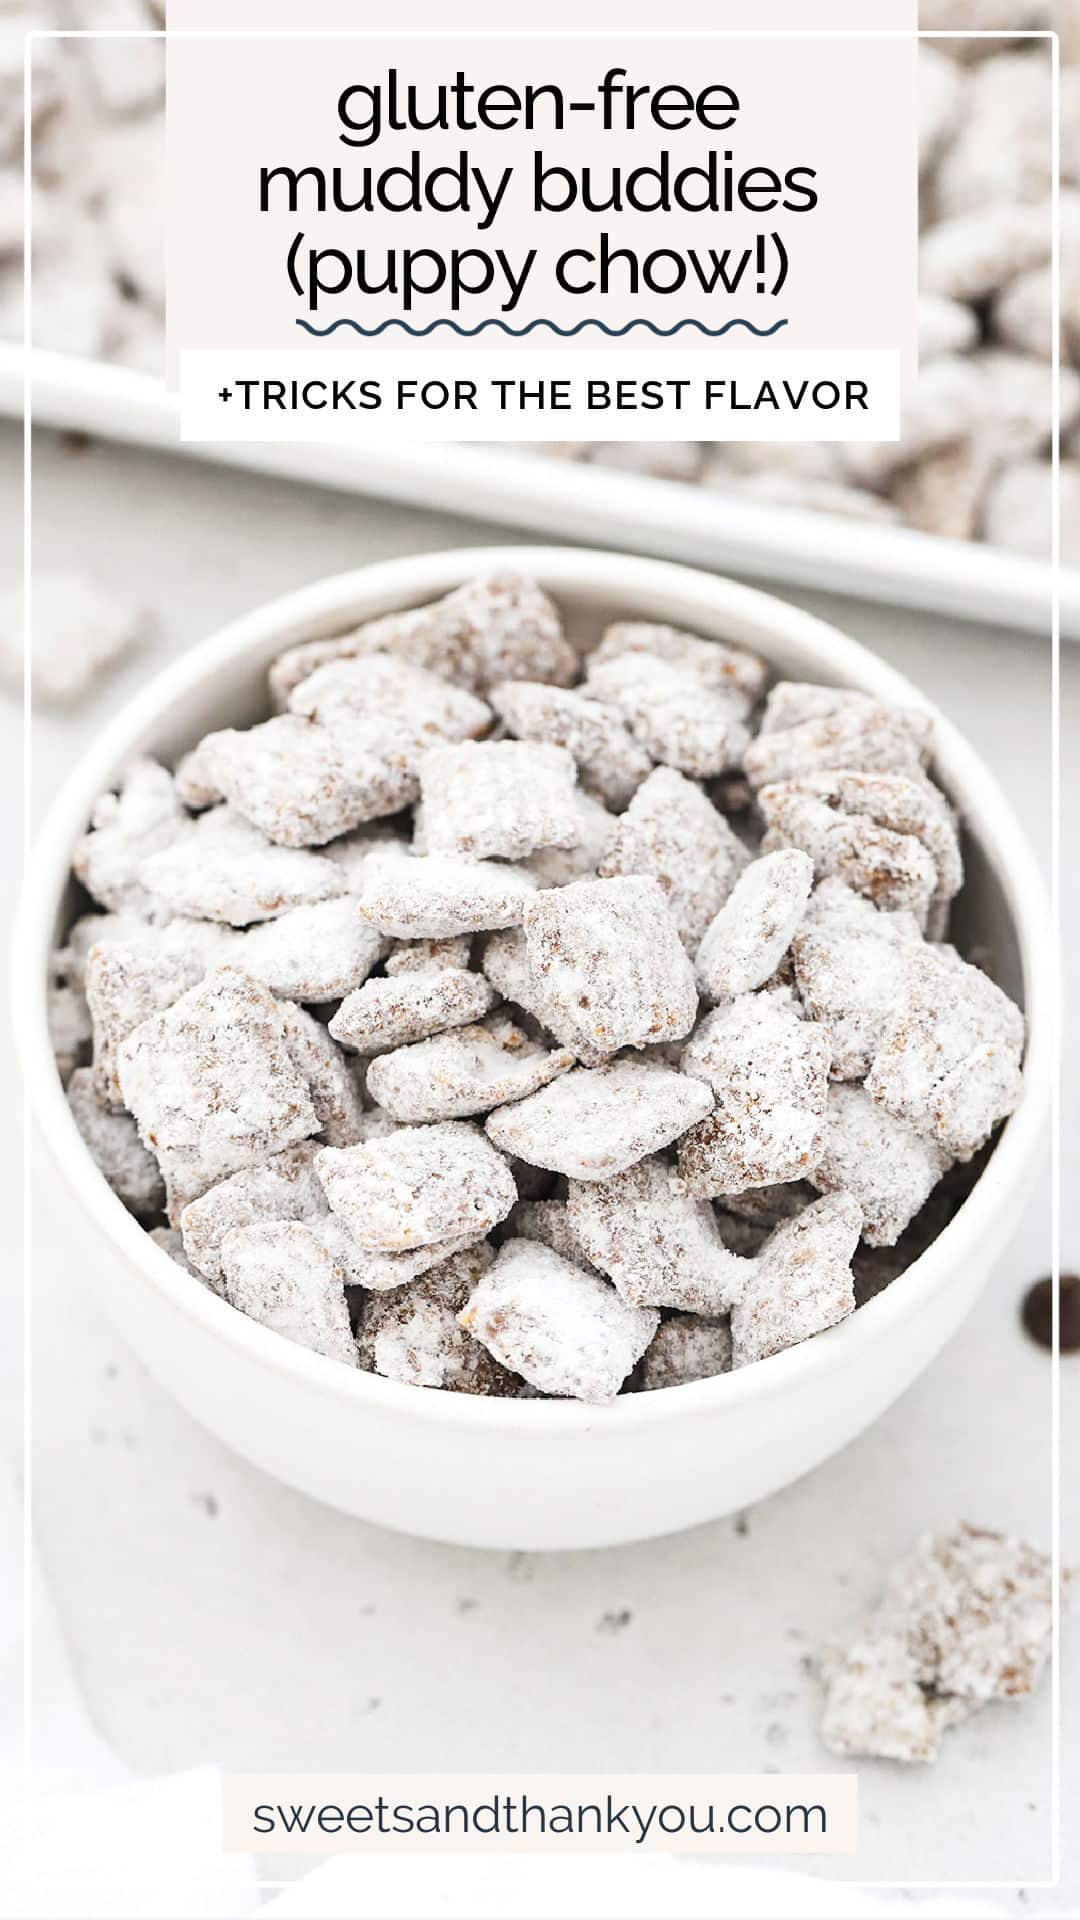 Learn how to make the BEST gluten-free muddy buddies (aka puppy chow) with our simple tricks. This classic no-bake treat has never been better! / gluten free puppy chow recipe / classic puppy chow / classic muddy buddies / gluten free muddy buddy recipe / how to make muddy buddy clusters / are muddy buddies gluten free / is puppy chow gluten free / gluten free no bake treat / gluten free no bake snack / gluten free party snack